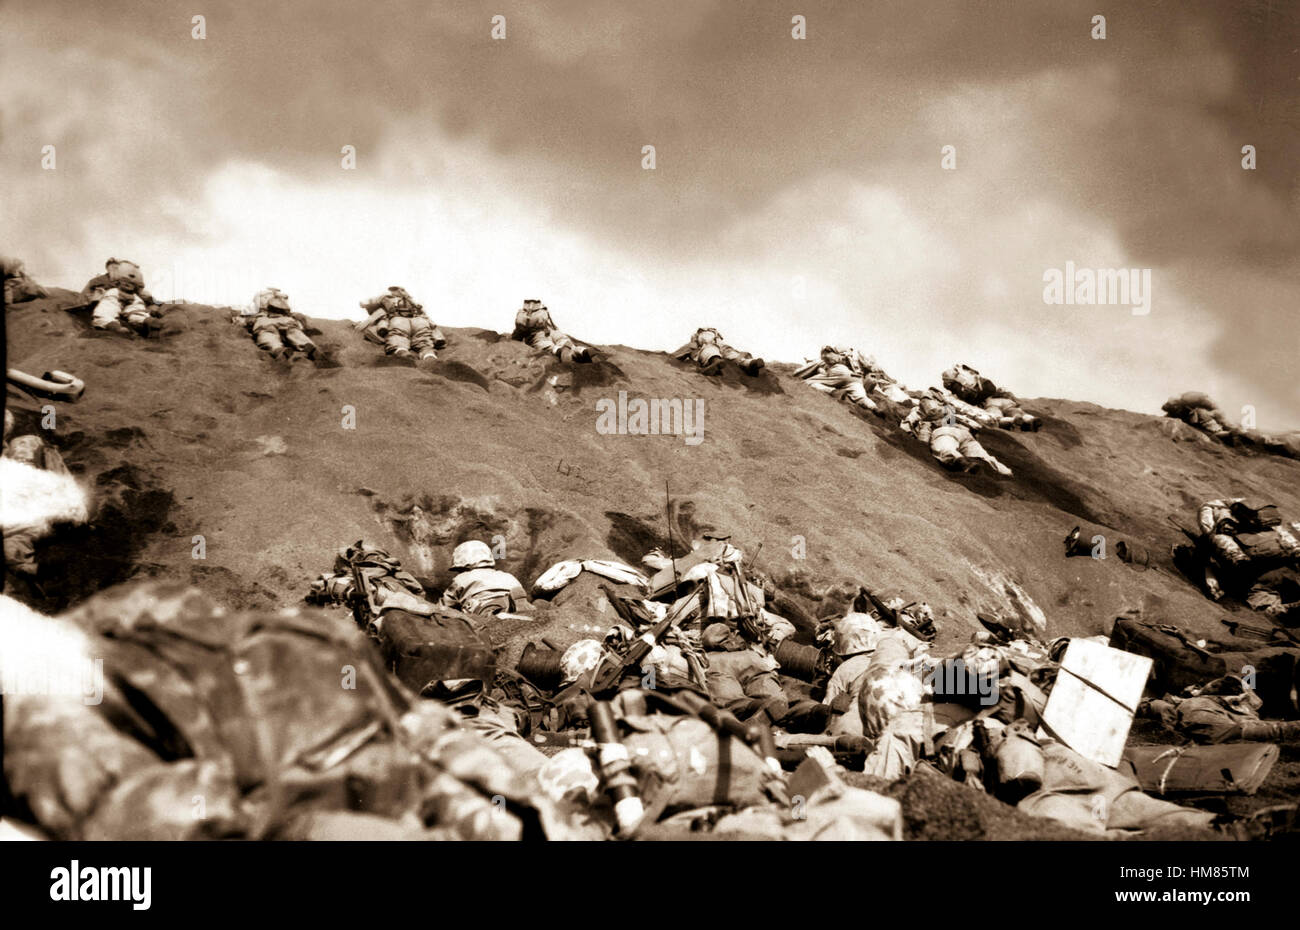 Marines of the 5th Division inch their way up a slope on Red Beach No. 1 toward Surbachi Yama as the smoke of the battle drifts about them.  Iwo Jima, February 19, 1945.  Dreyfuss.  (Marine Corps) NARA FILE #:  127-N-110249 WAR & CONFLICT BOOK #:  1217 Stock Photo